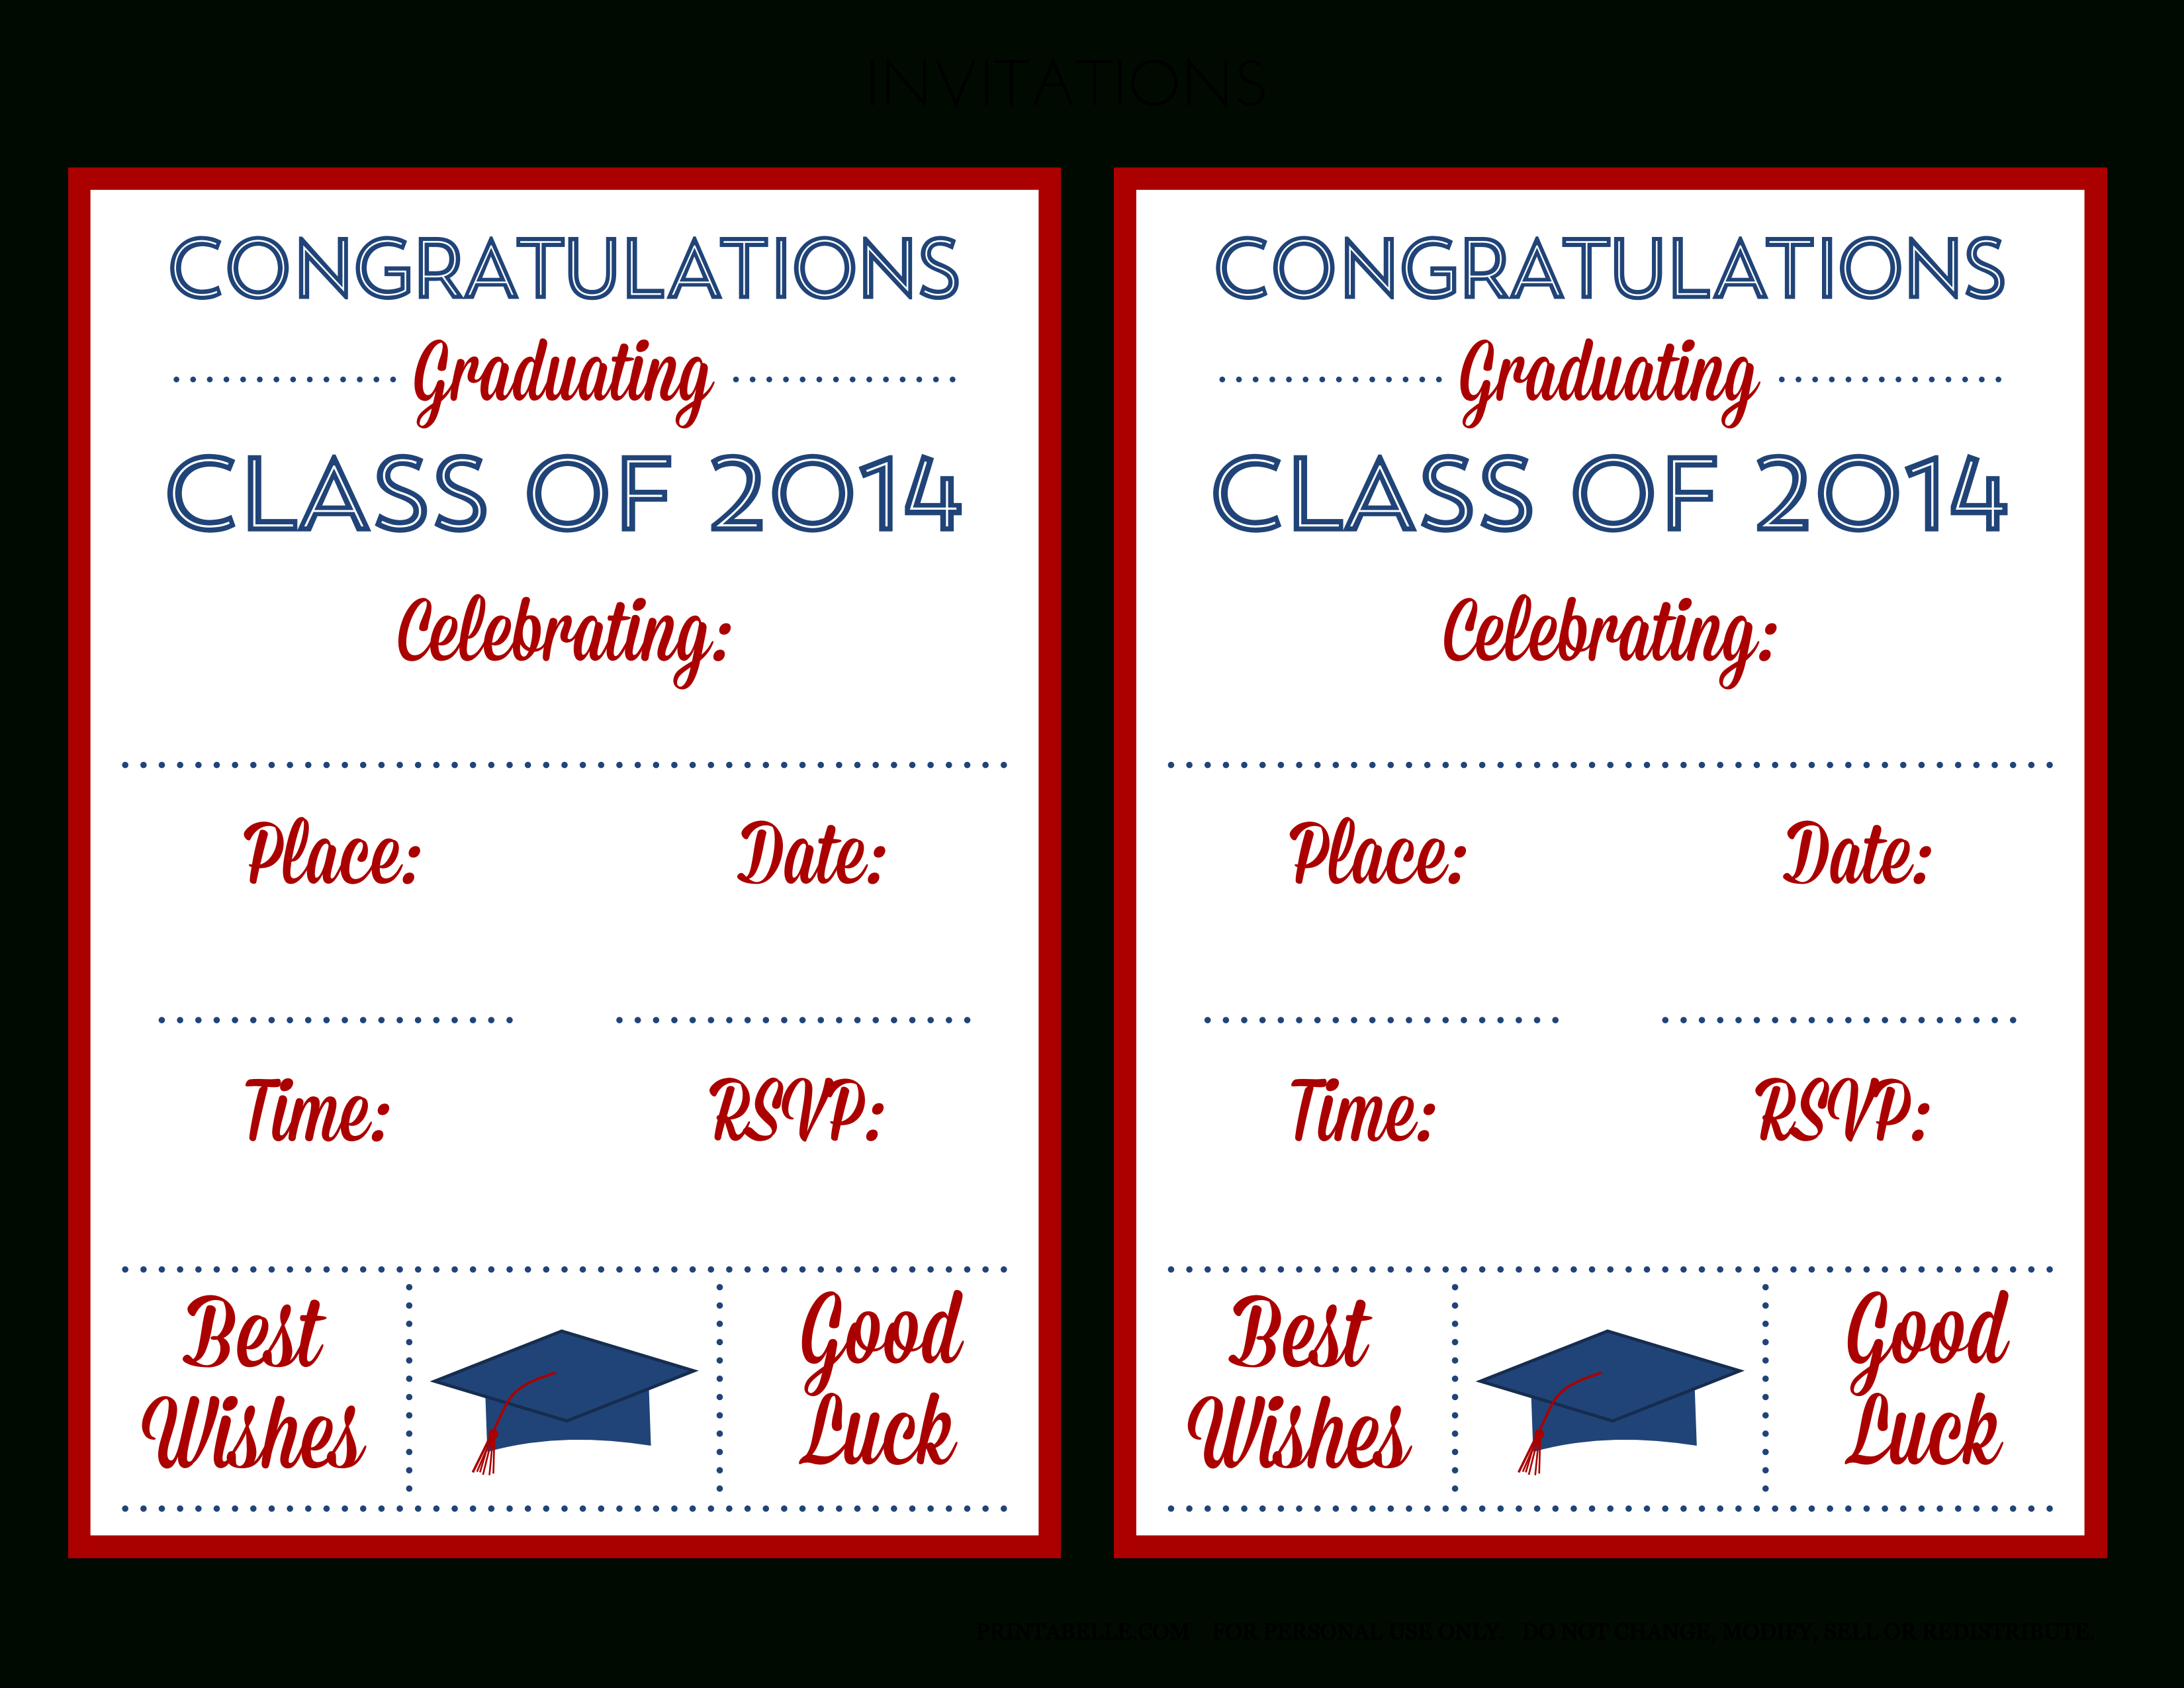 Free 2014 Graduation Party Printables From Printabelle | Catch My Party - Free Printable Graduation Party Invitations 2014